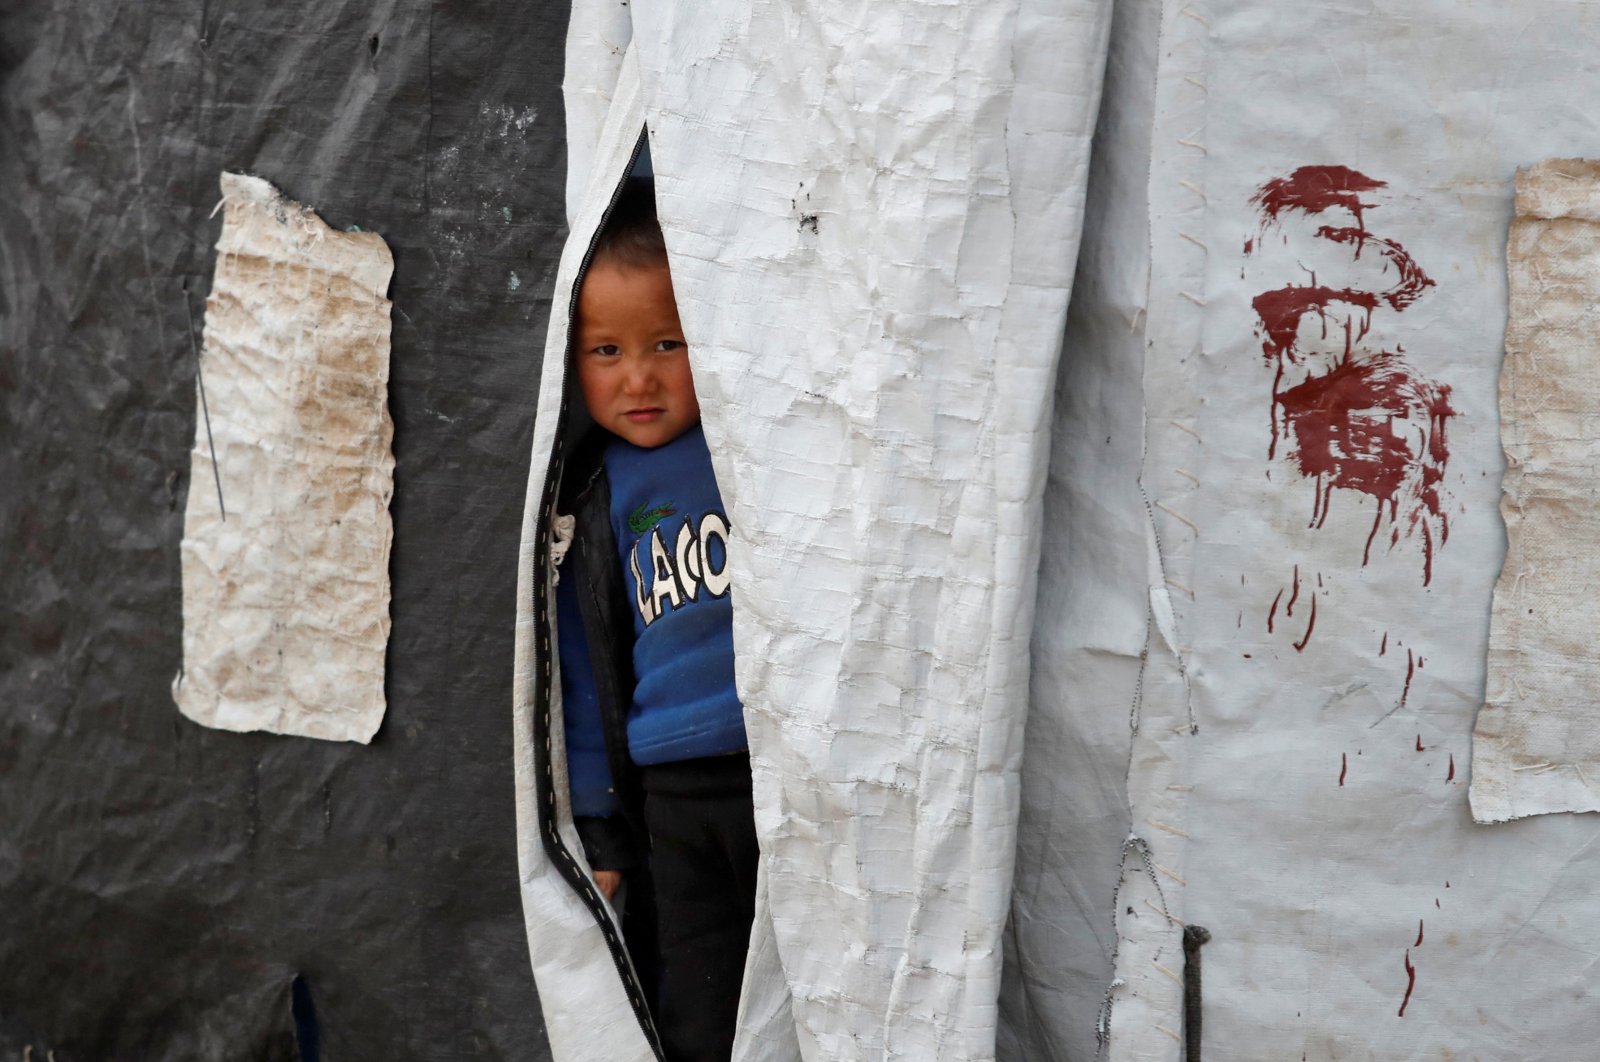 A boy looks out from inside a tent in al-Roj camp, Syria, Jan. 10, 2020. (Reuters File Photo)